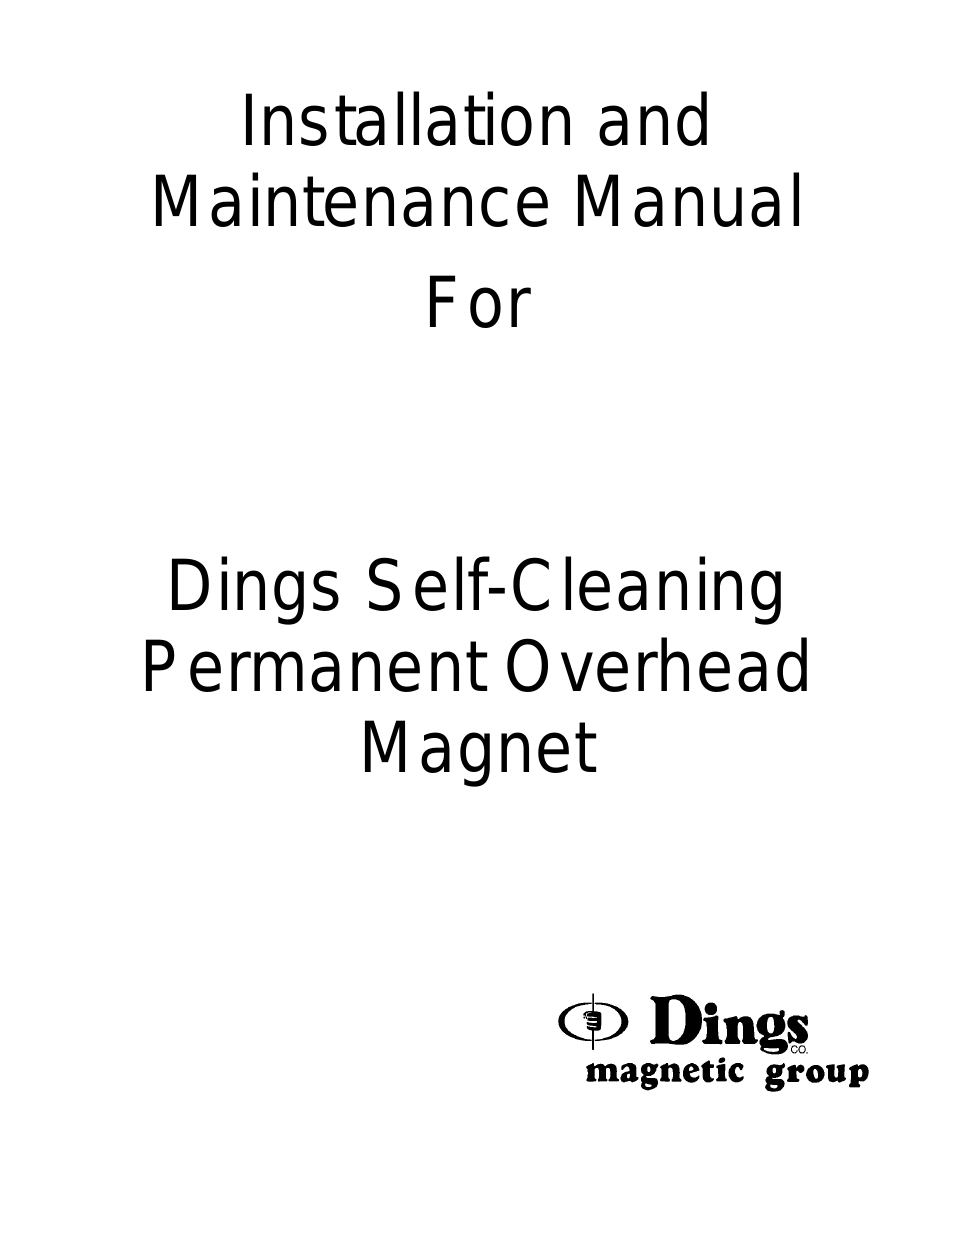 Self-Cleaning Permanent Overhead Magnet